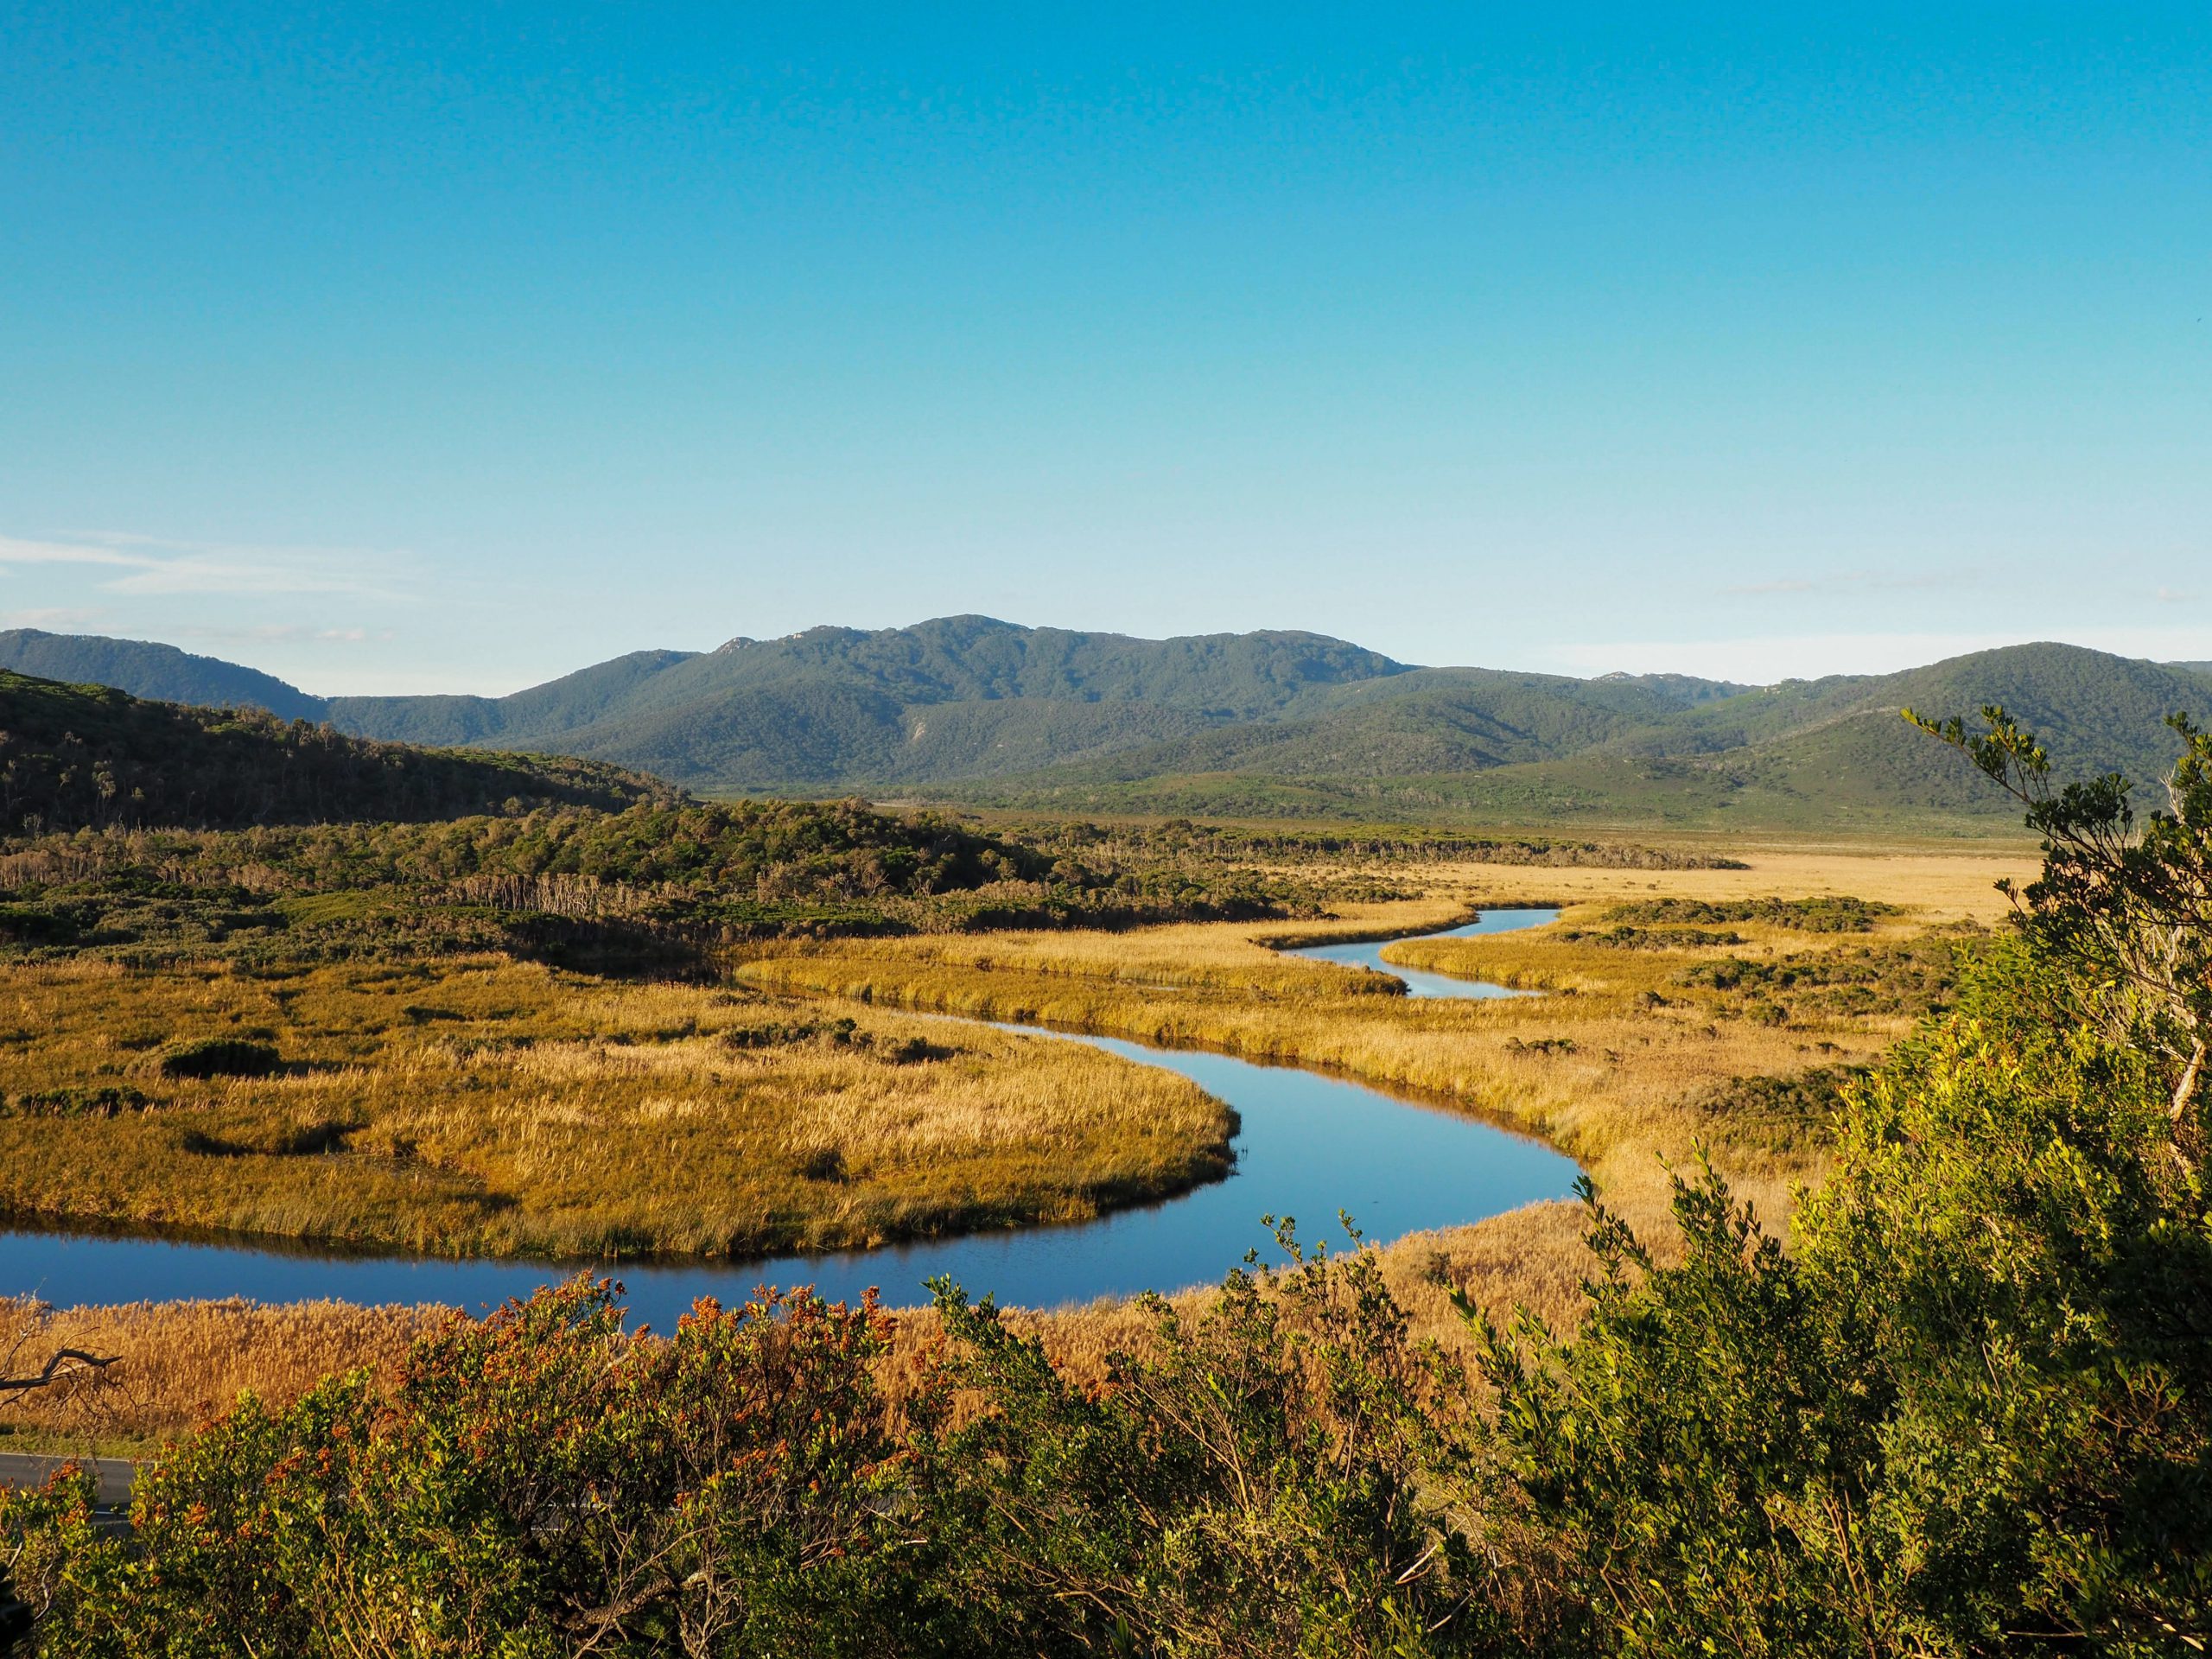 A winding blue river running through grassy marshland with green mountains in the distance.